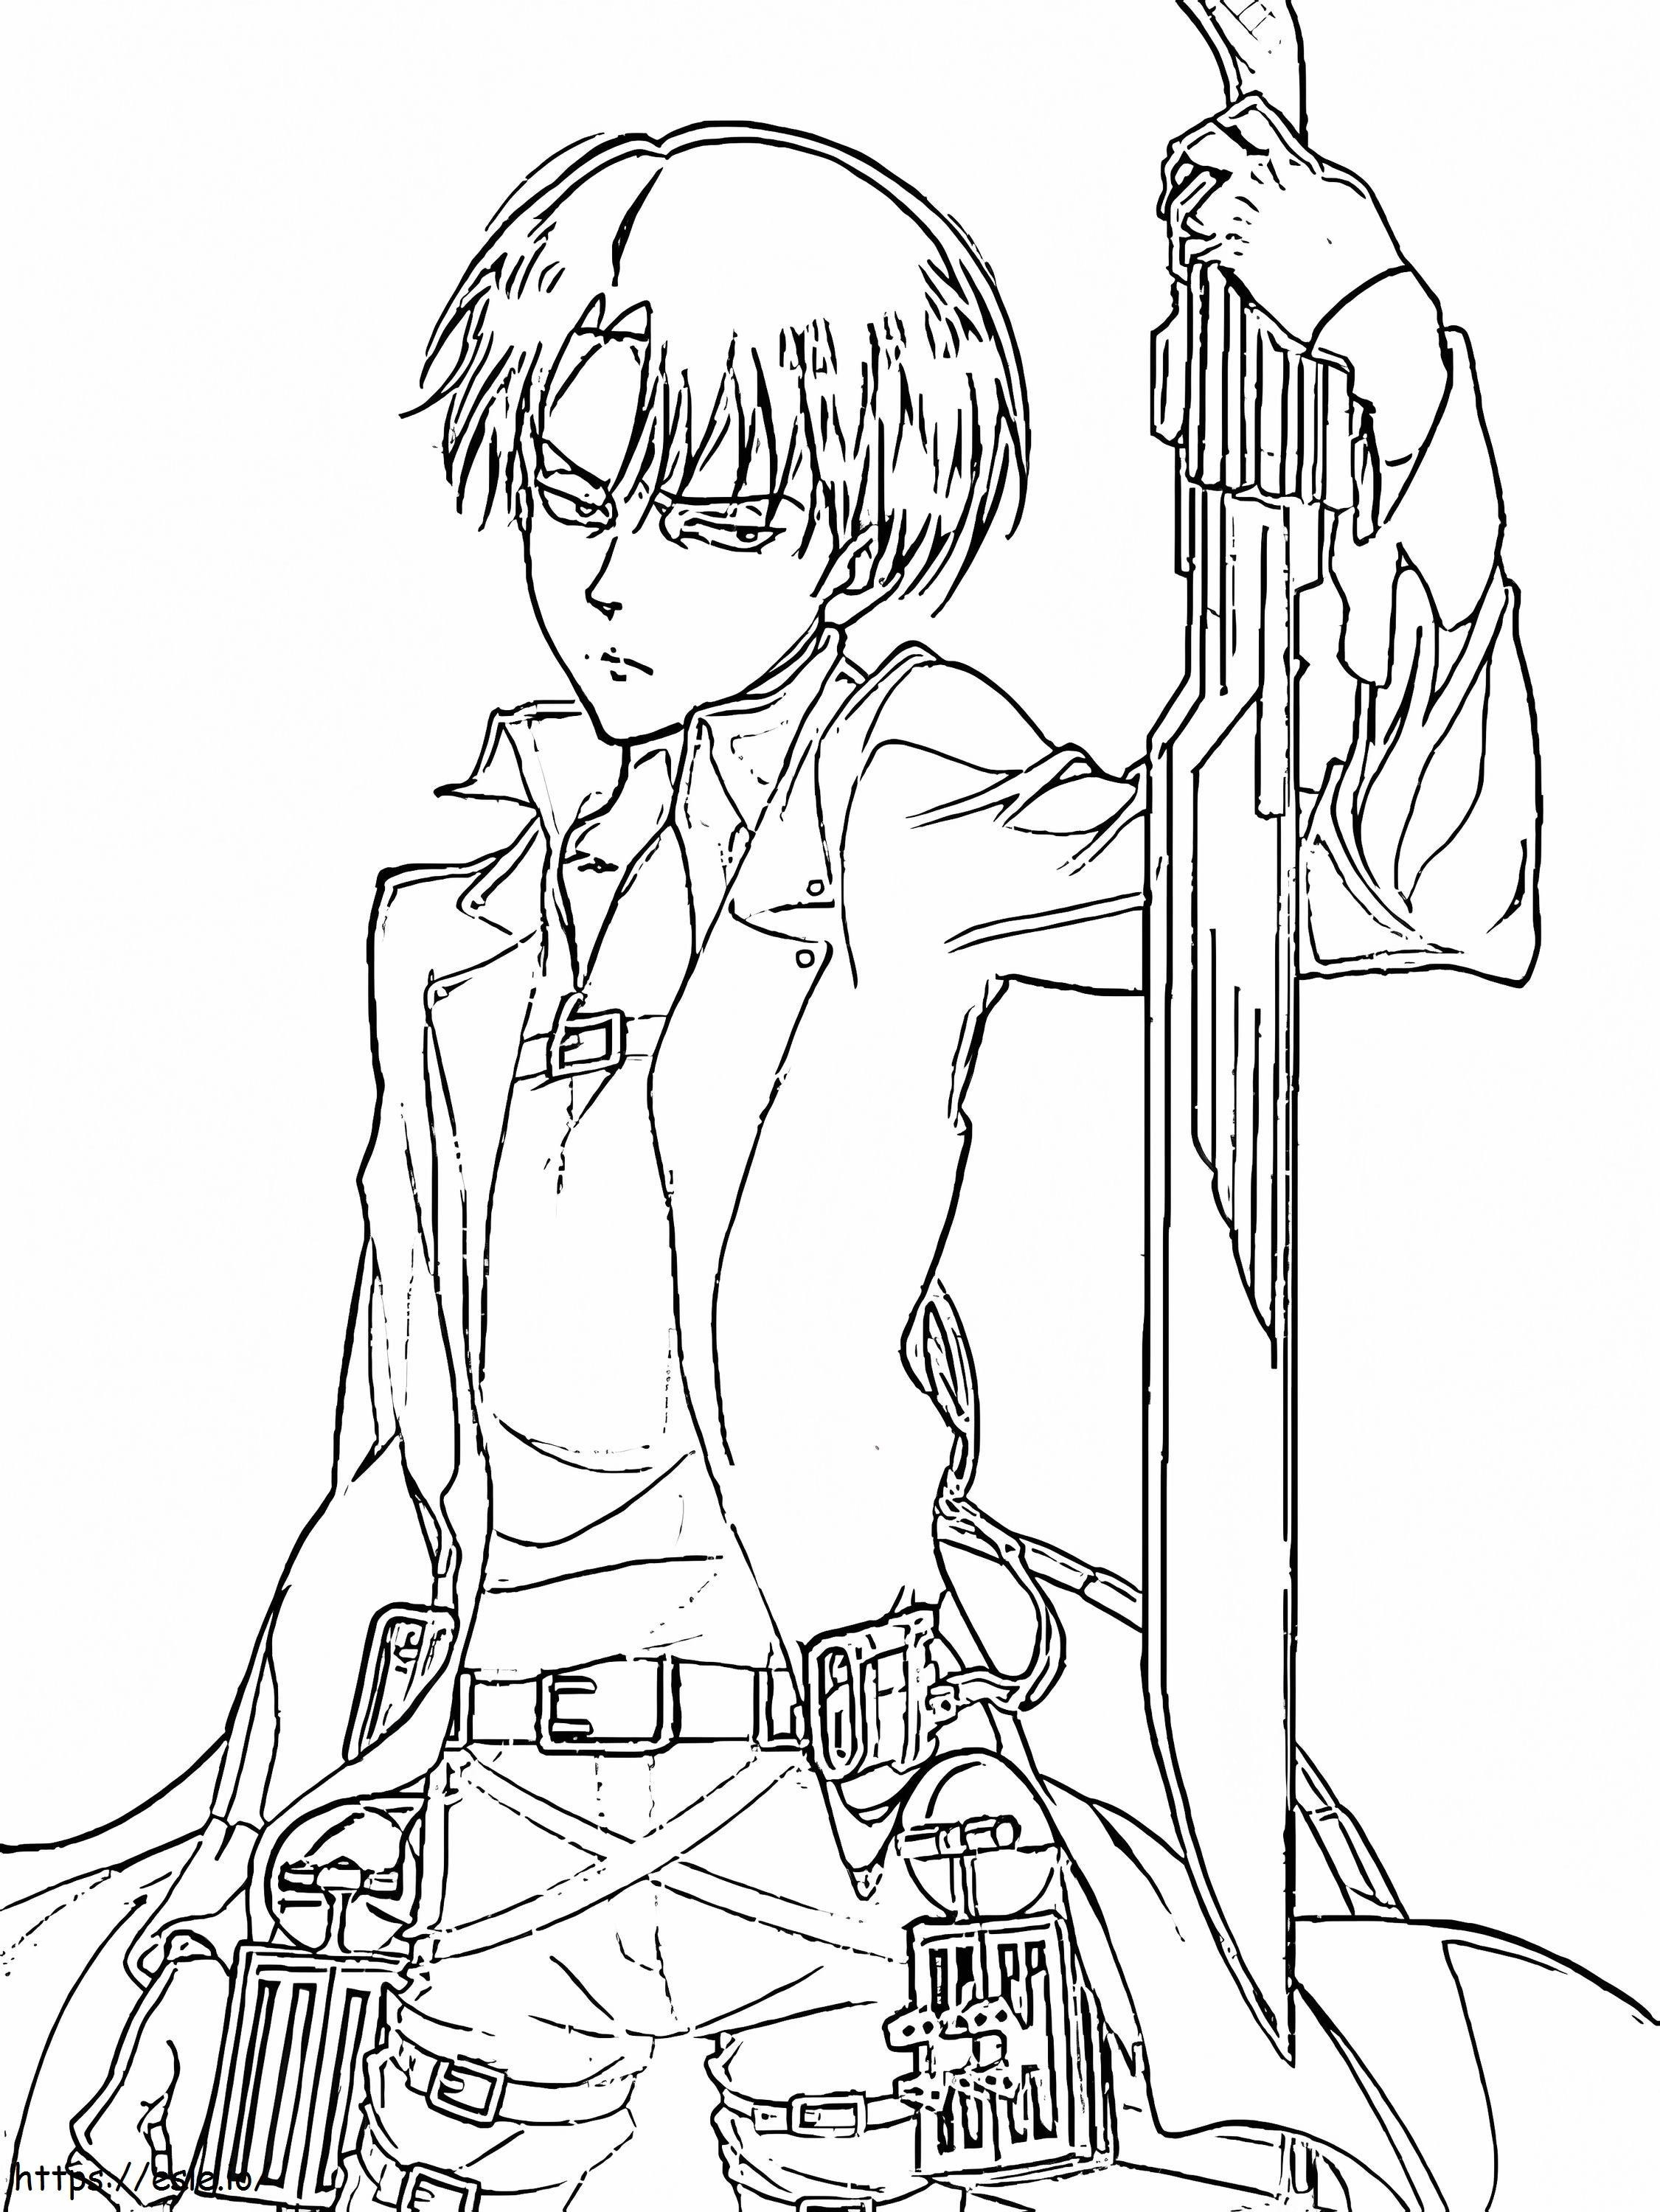 Awesome Levi coloring page